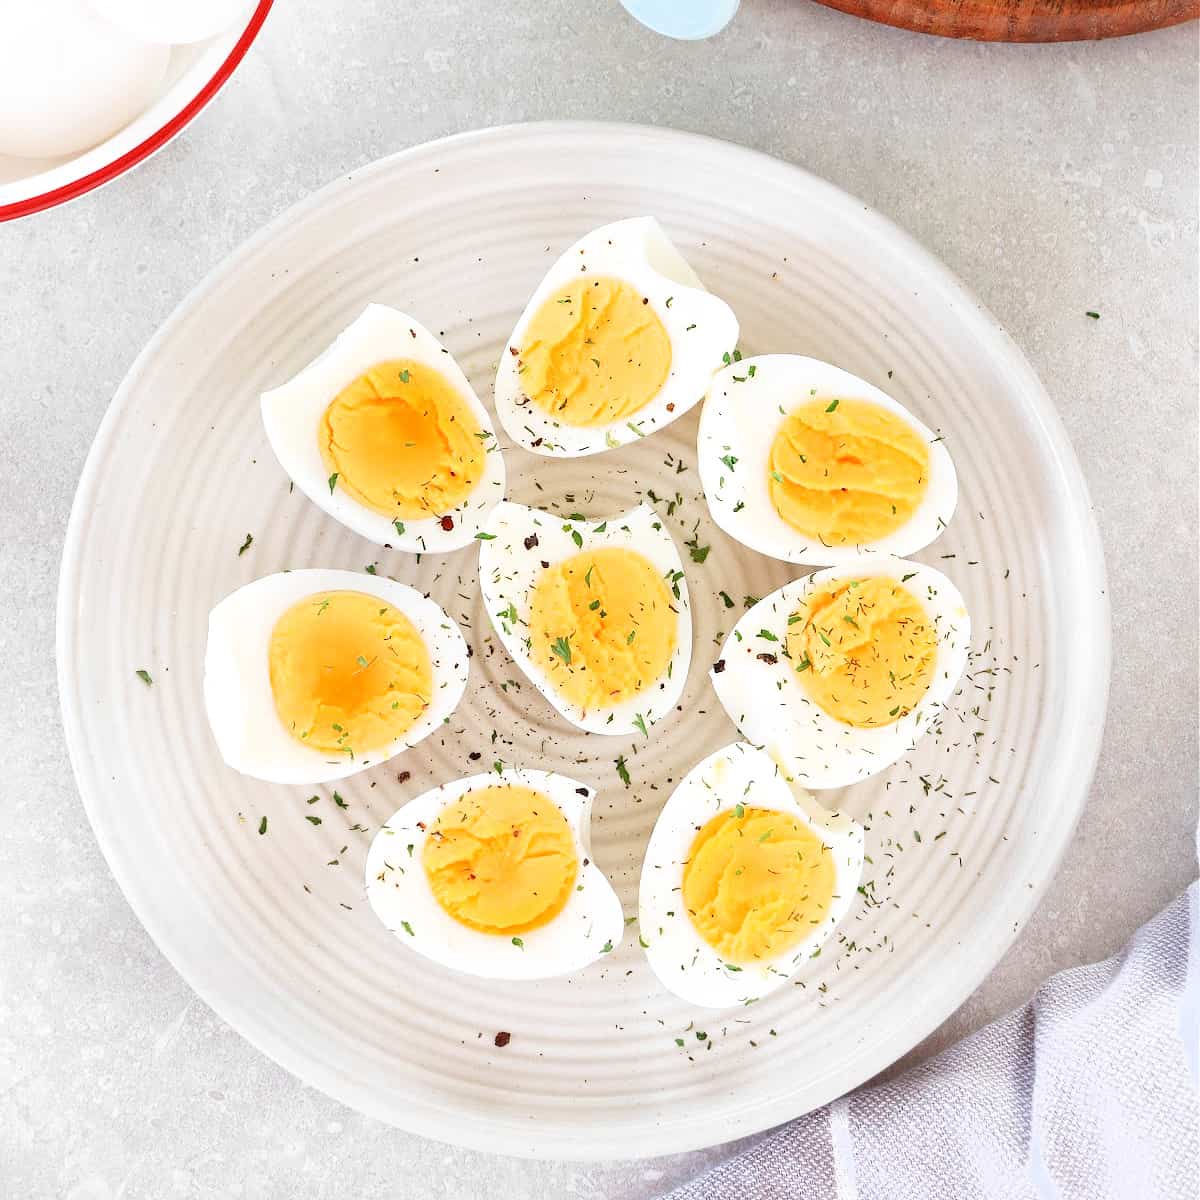 Sliced cooked eggs on a plate.